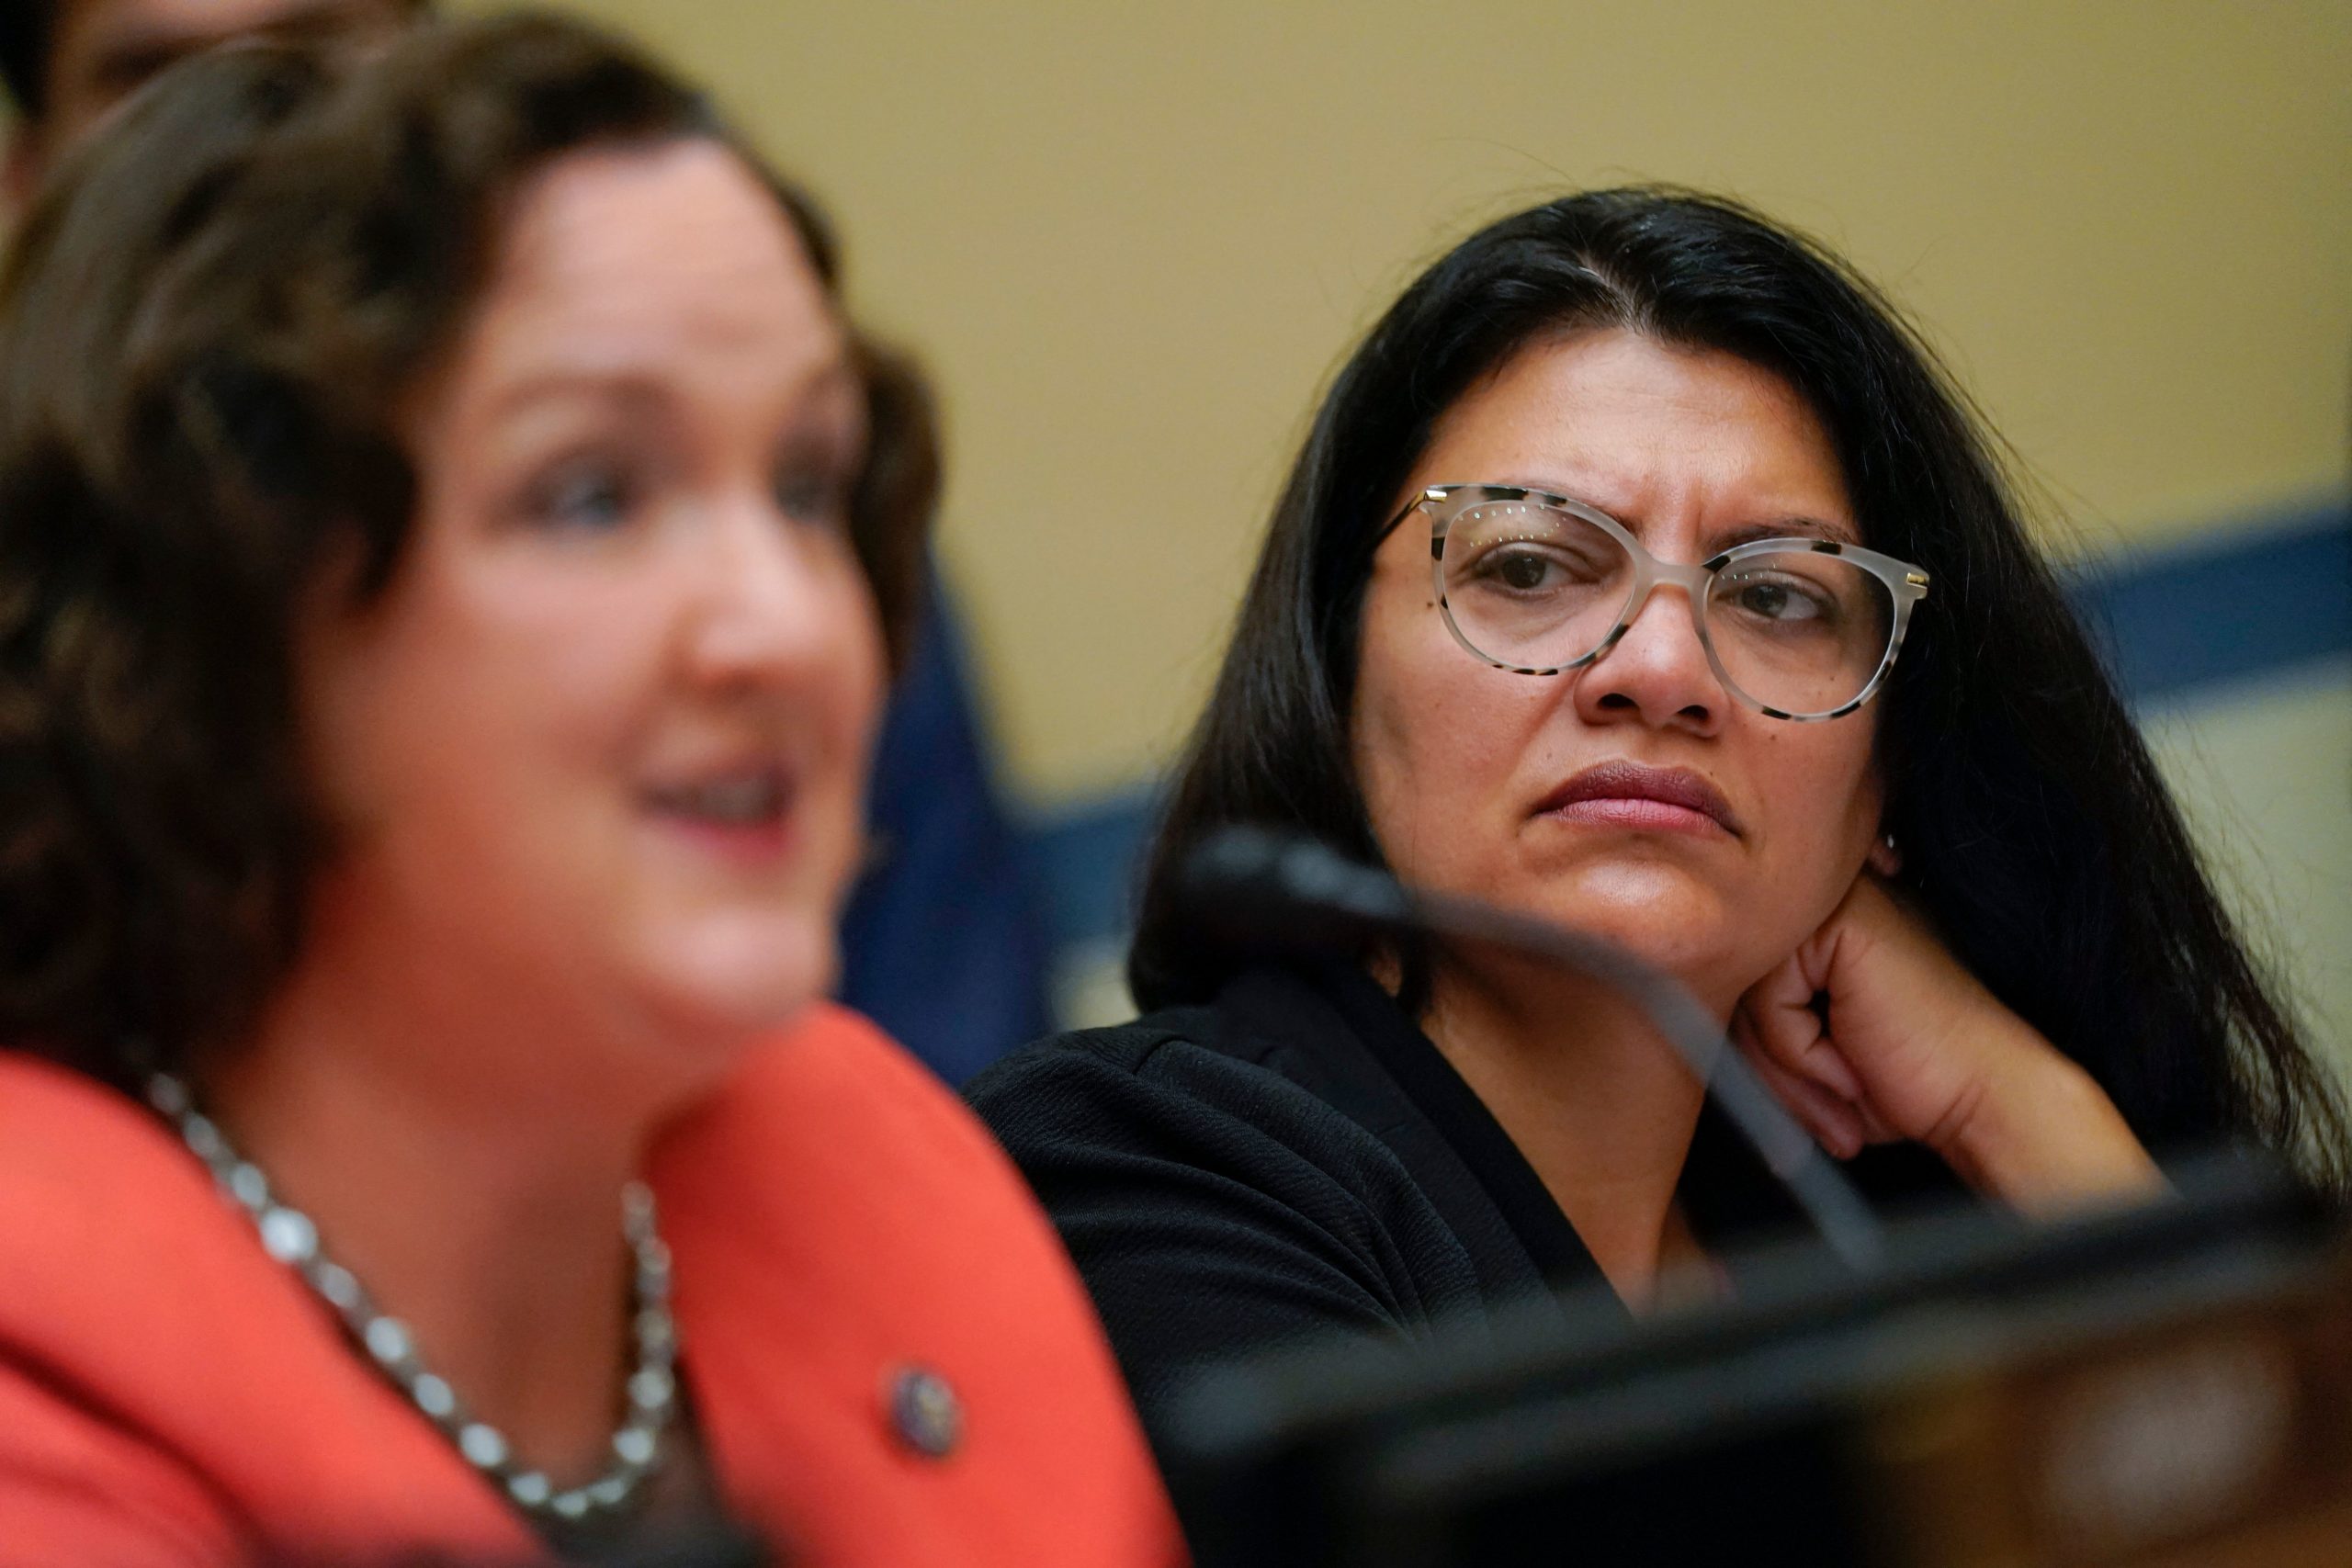 Rep. Rashida Tlaib, D-Mich., right, listens as Rep. Katie Porter, D-Calif., left, speaks during a House Committee on Oversight and Reform hearing on gun violence on Capitol Hill in Washington, DC, June 8, 2022. (Photo by Andrew Harnik / POOL / AFP) (Photo by ANDREW HARNIK/POOL/AFP via Getty Images)